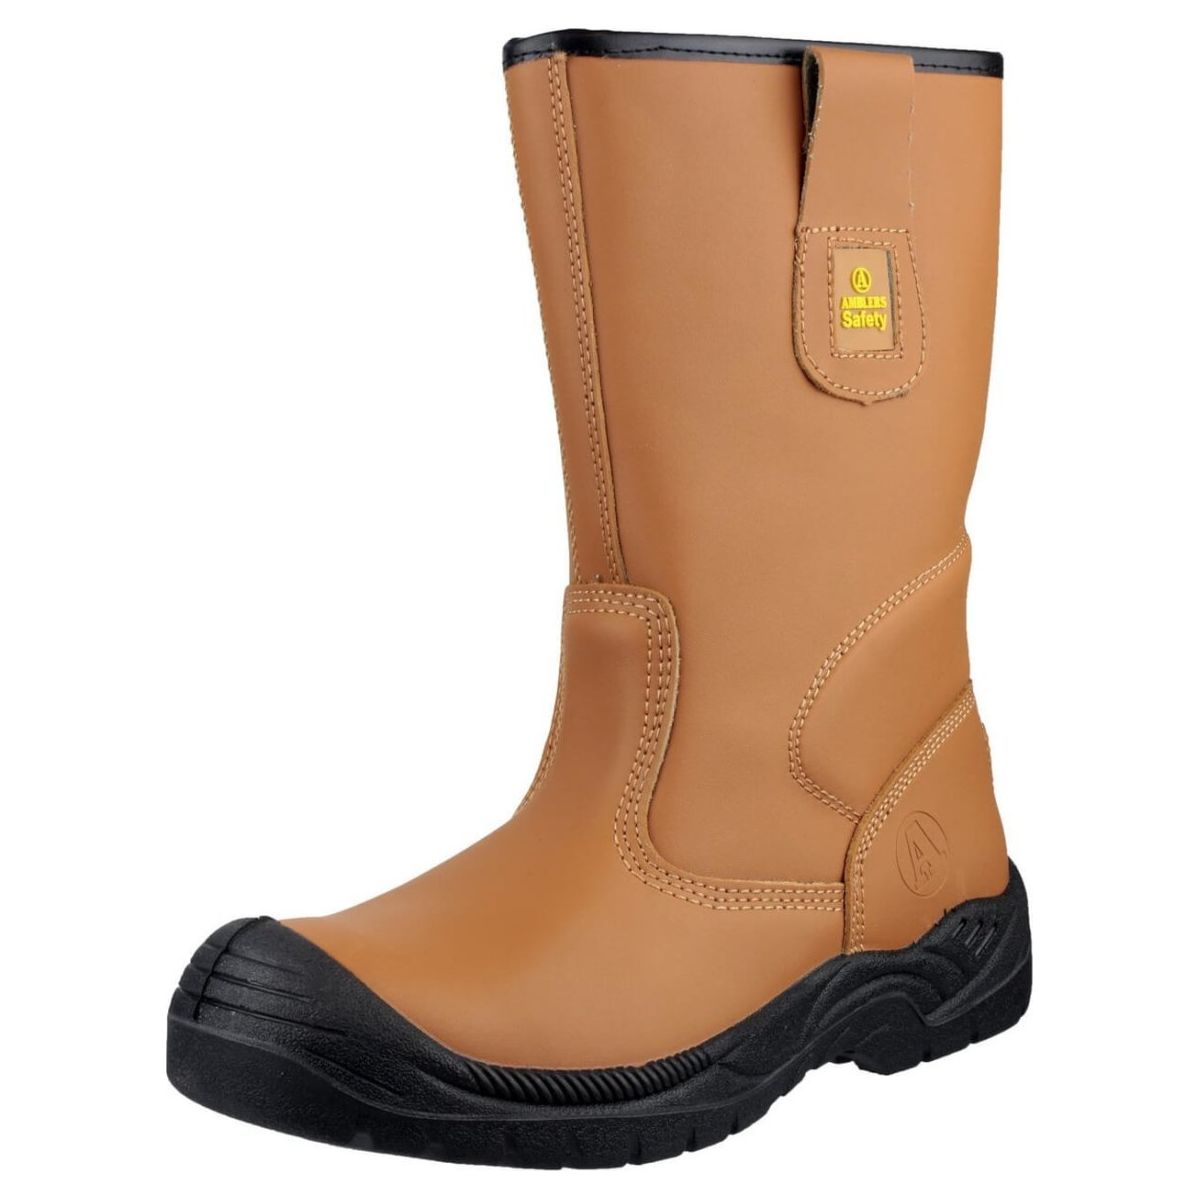 Amblers Fs142 Safety Rigger Boots Womens - workweargurus.com